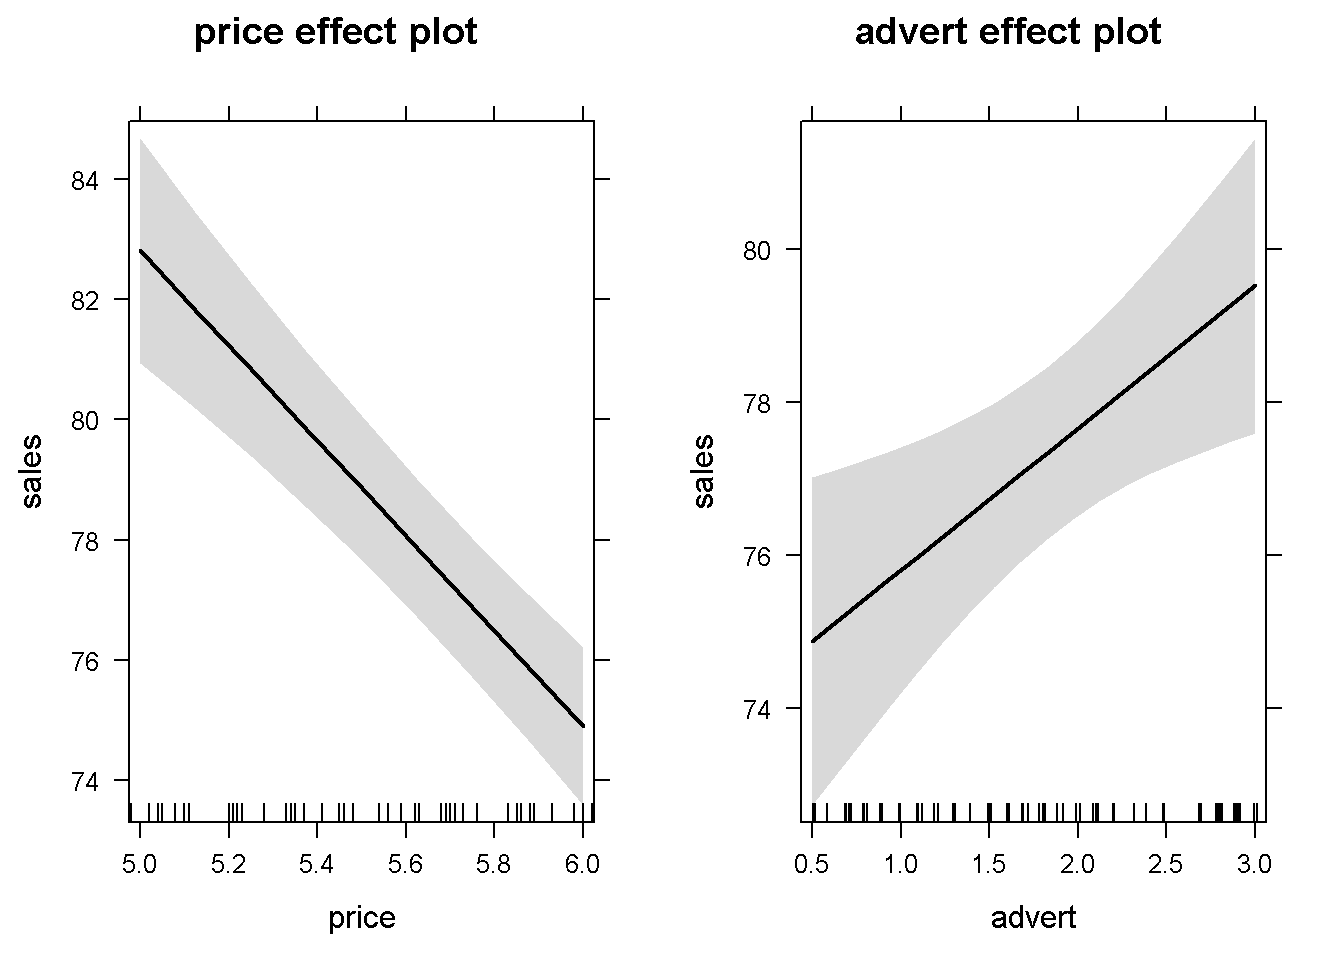 Using the function 'allEffects()' in the basic $andy$ model